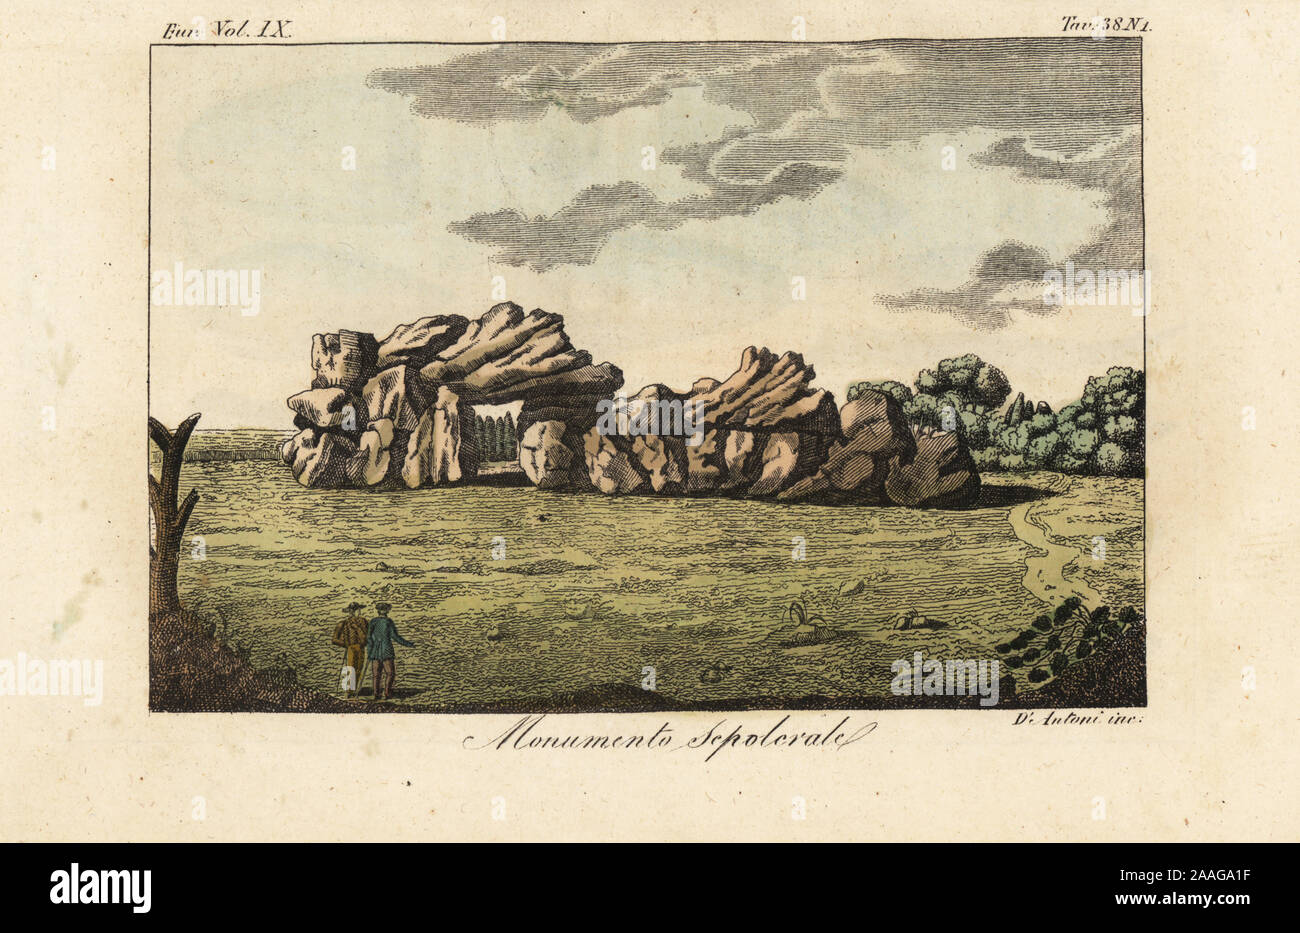 Ancient sepulchral monument in Germany. Stone megalith structure of the ancient Germanic people. Monumento Sepolcrale. Handcoloured copperplate engraving by Antoni from Giulio Ferrario’s Costumes Ancient and Modern of the Peoples of the World, Il Costume Antico e Moderno, Florence, 1837. Stock Photo